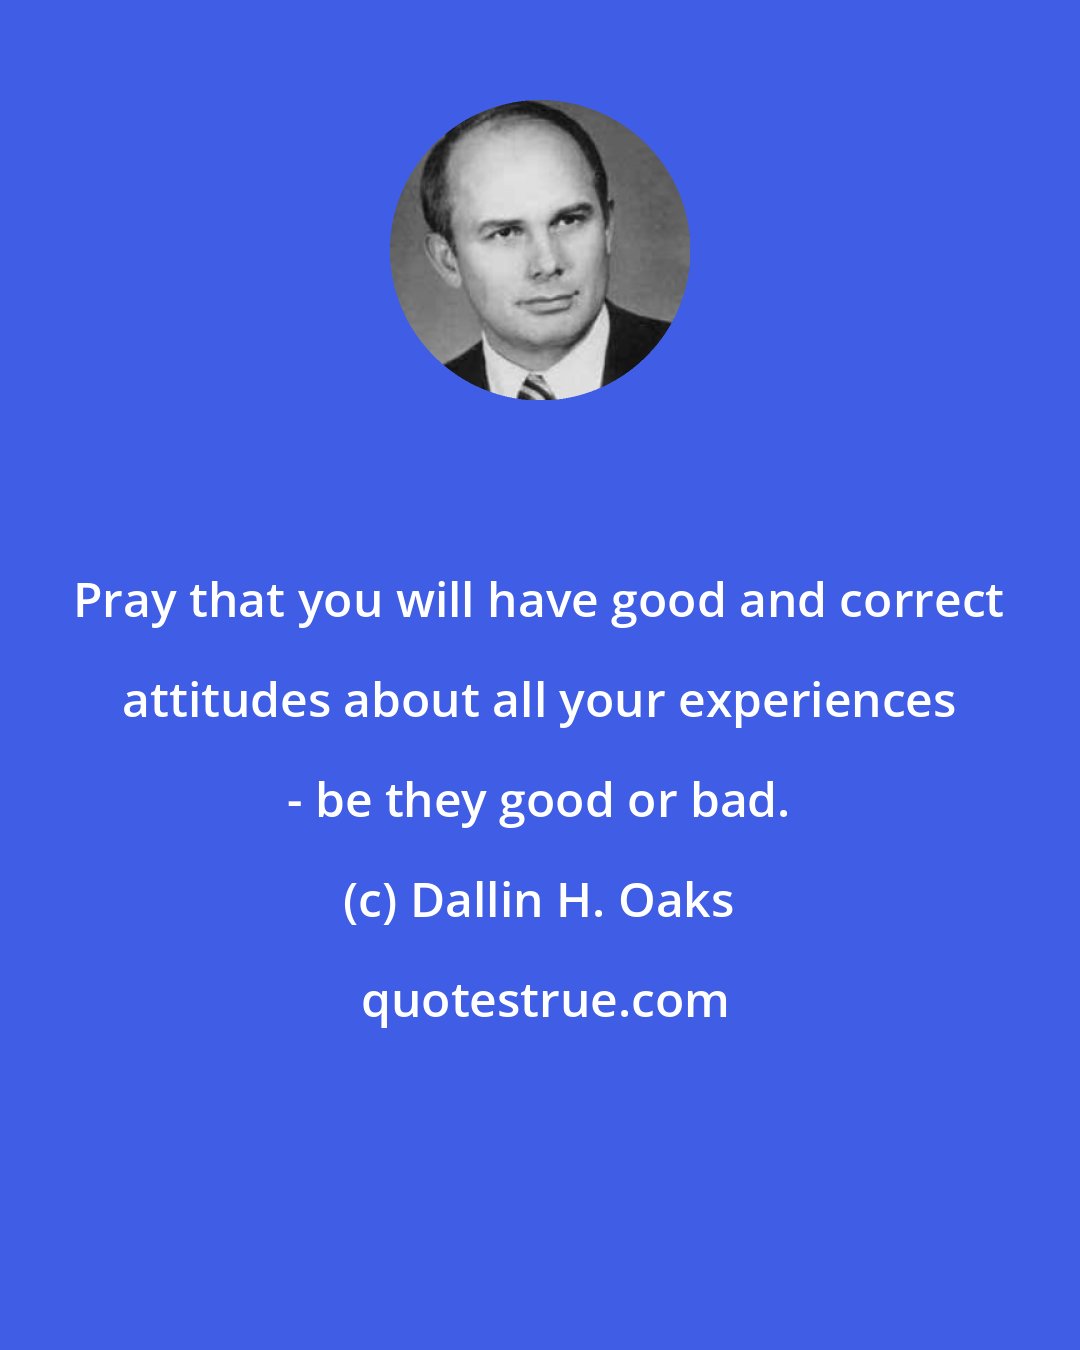 Dallin H. Oaks: Pray that you will have good and correct attitudes about all your experiences - be they good or bad.